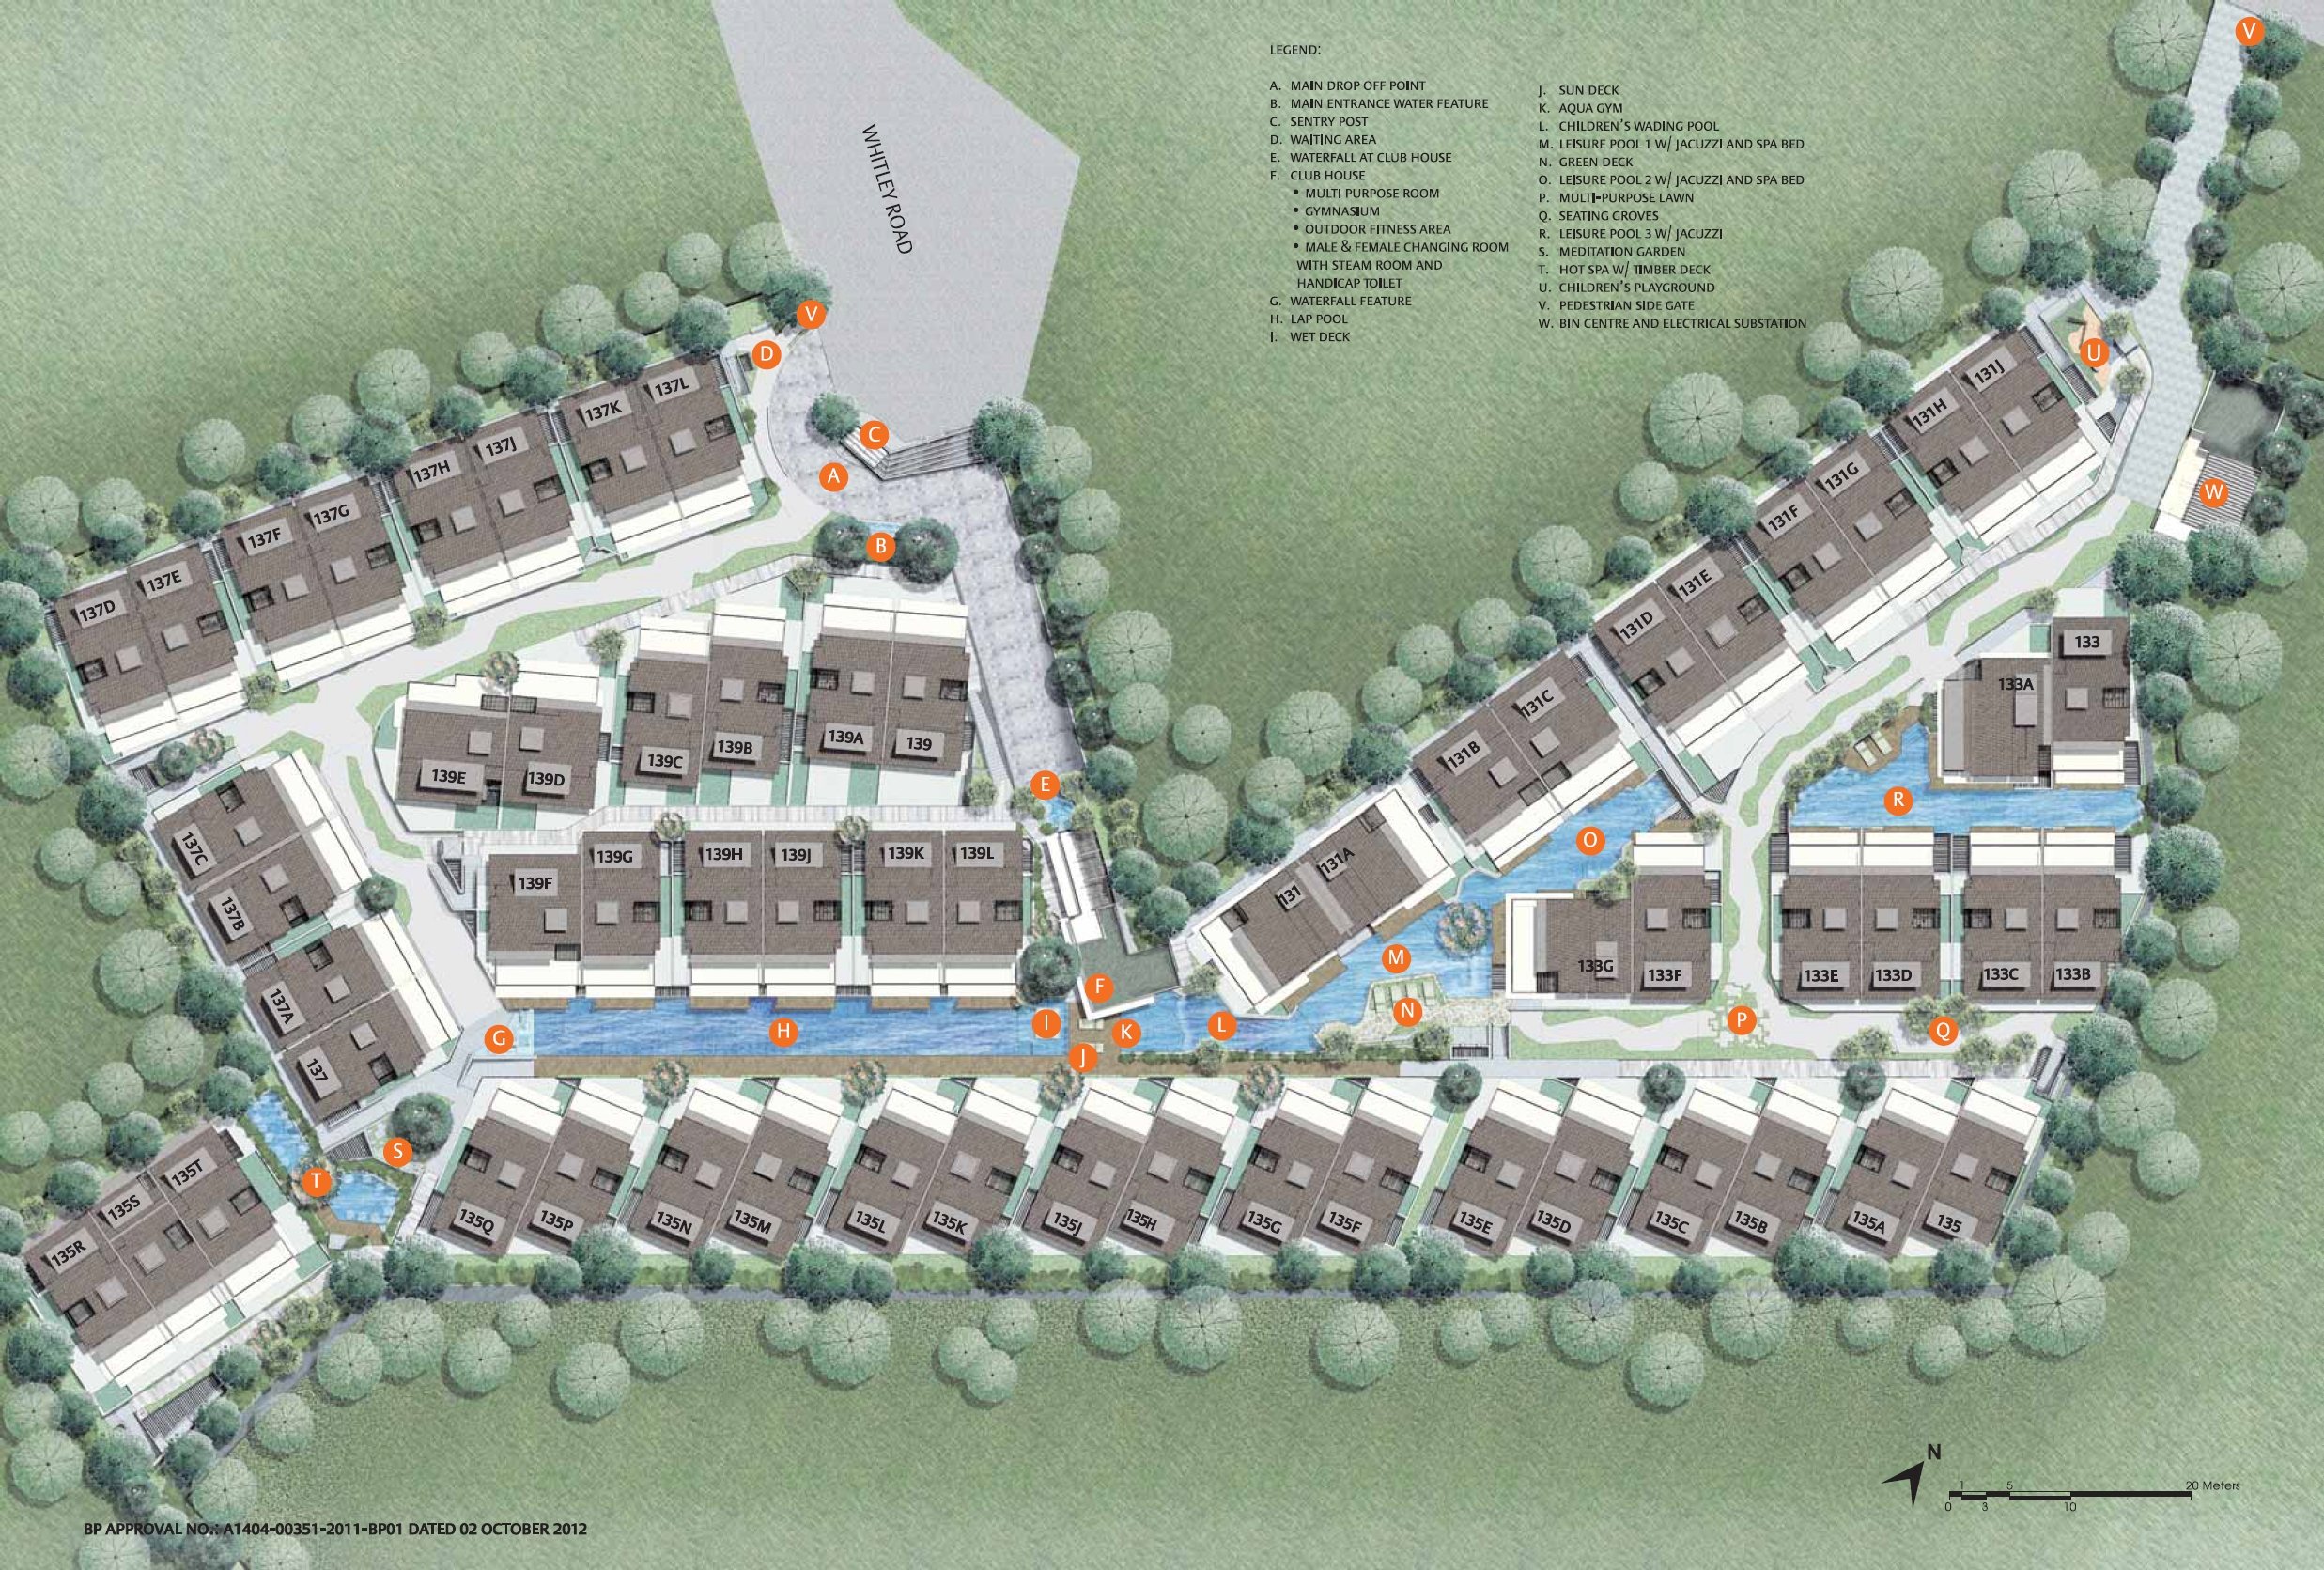 The Whitley Residences site plan